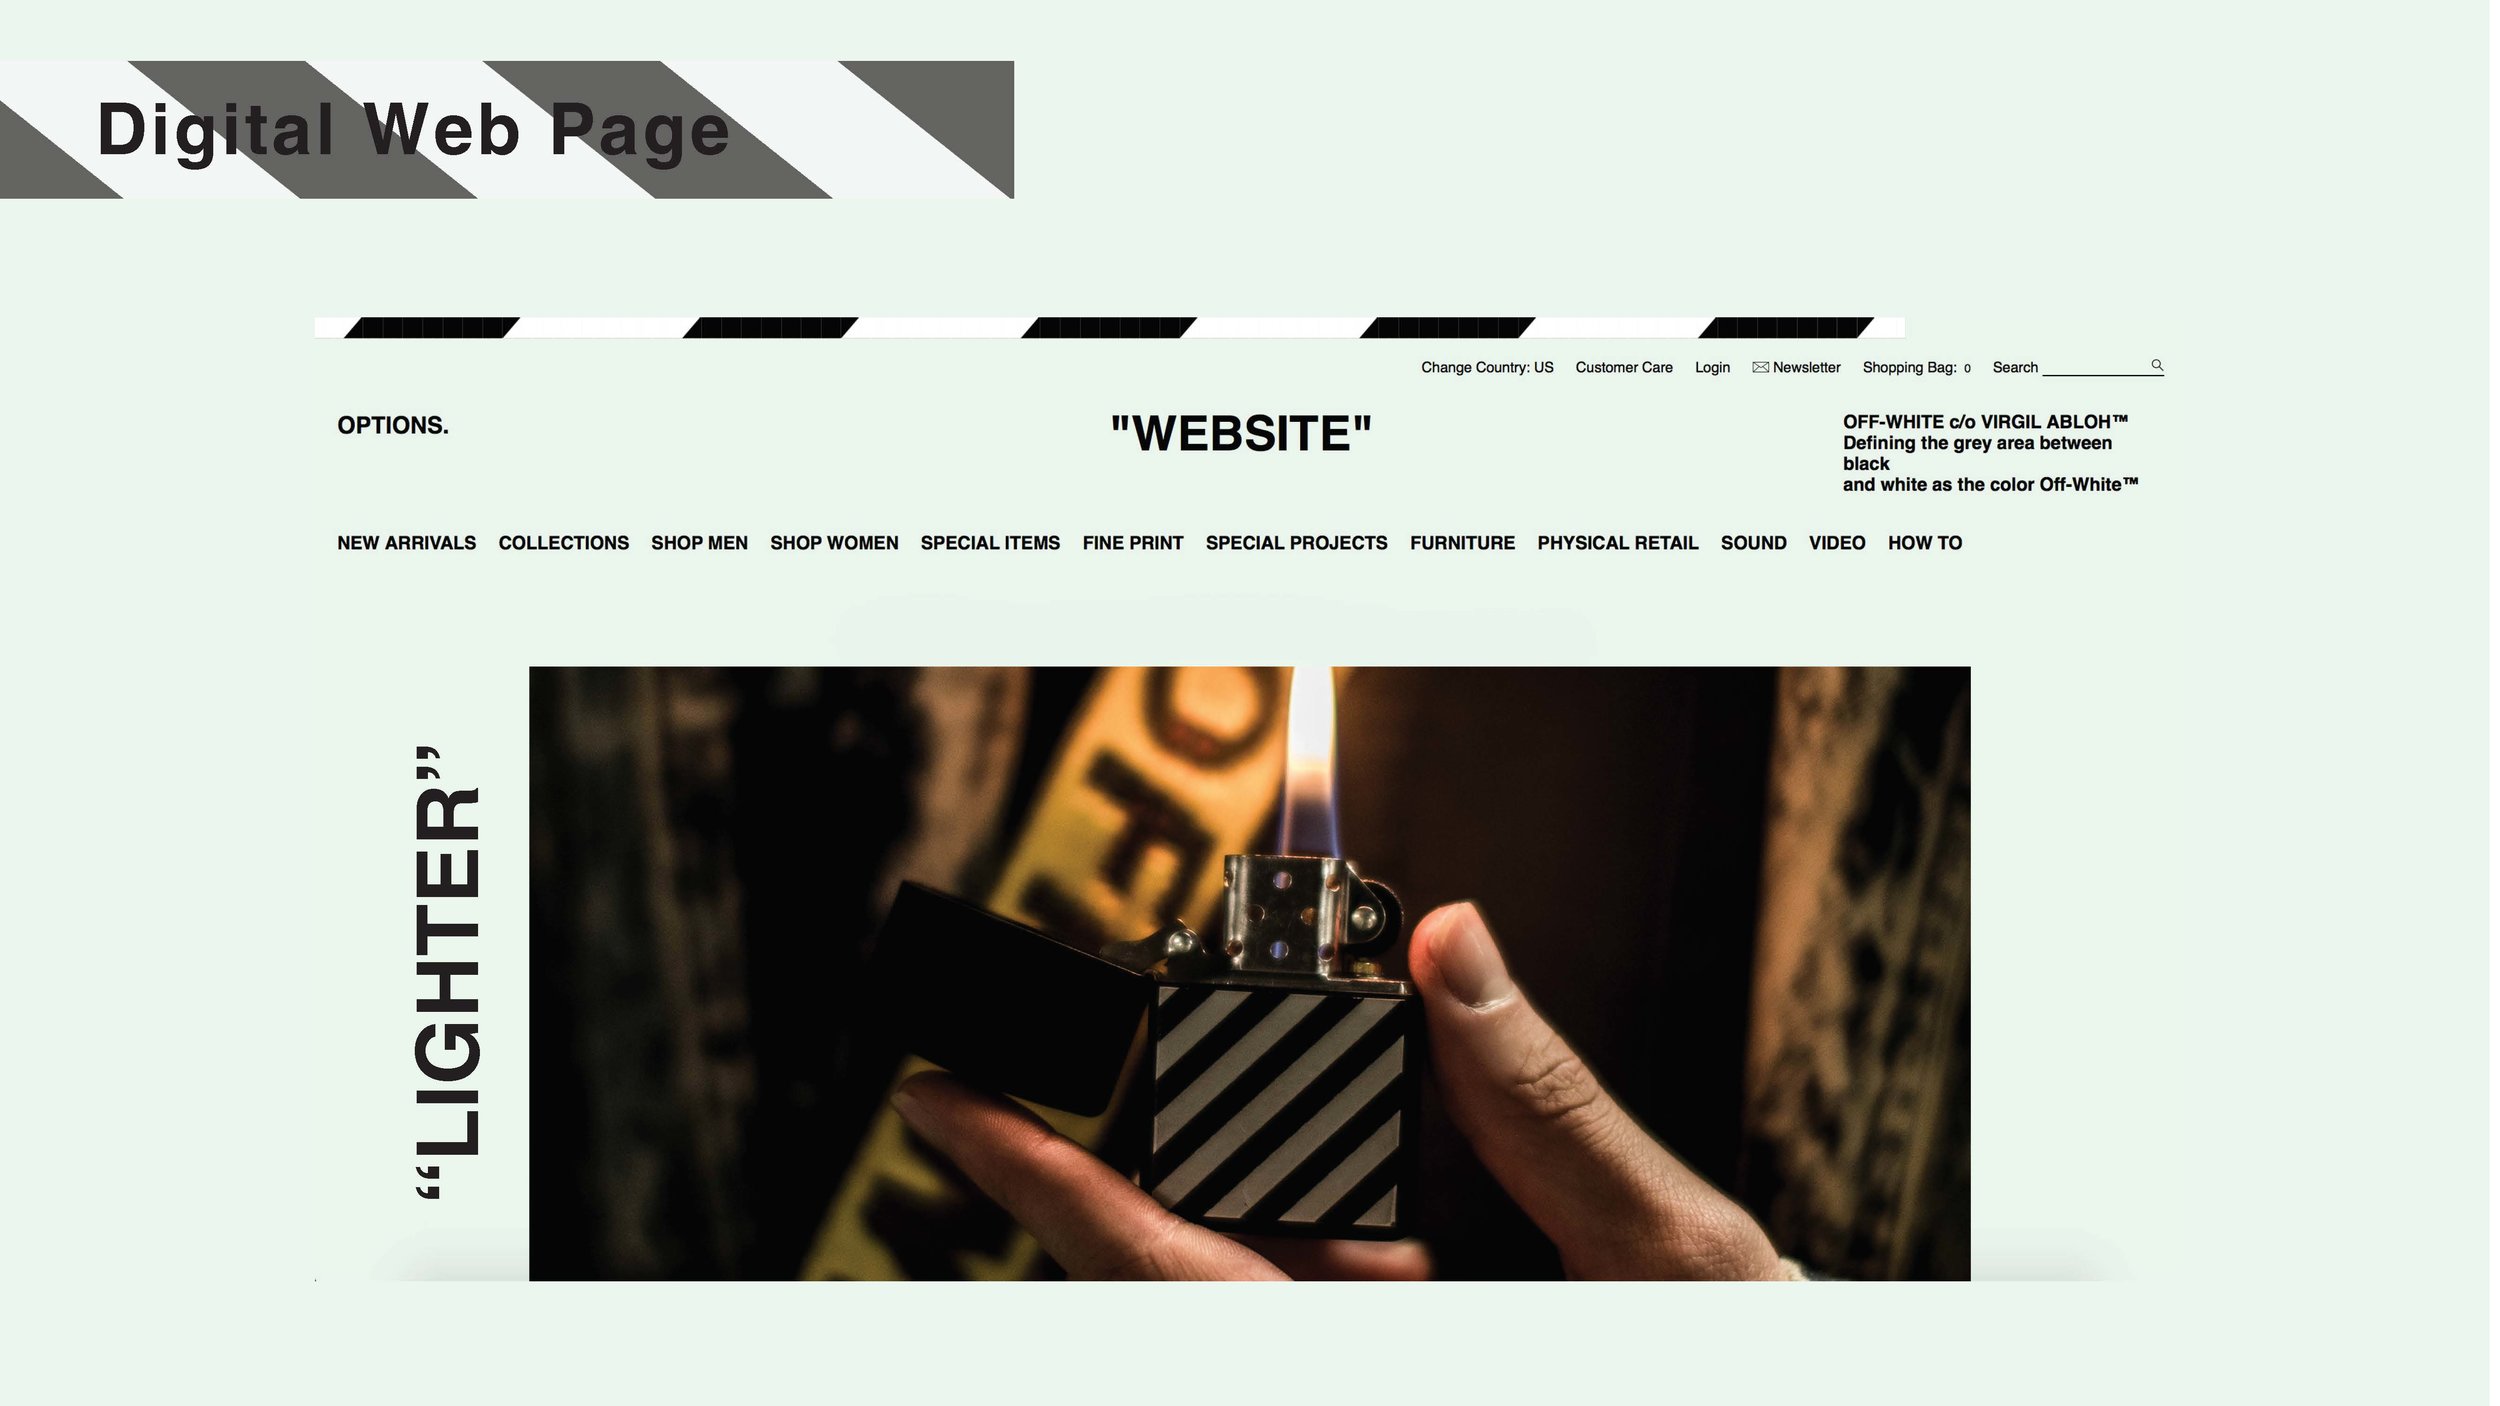 OFF-WHITE Brand Extension copy_Page_30.jpg